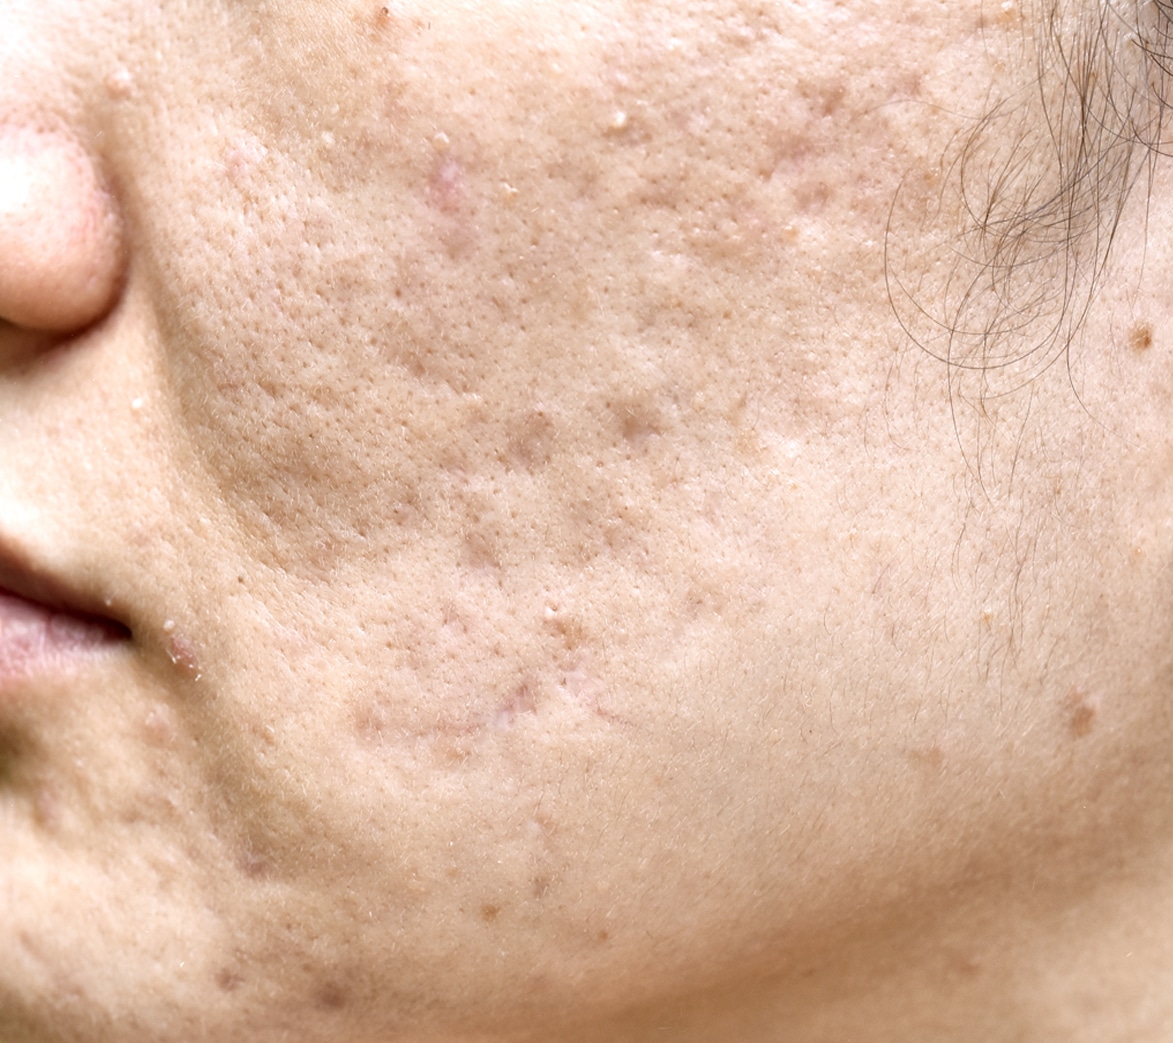 Acne scarring treatment